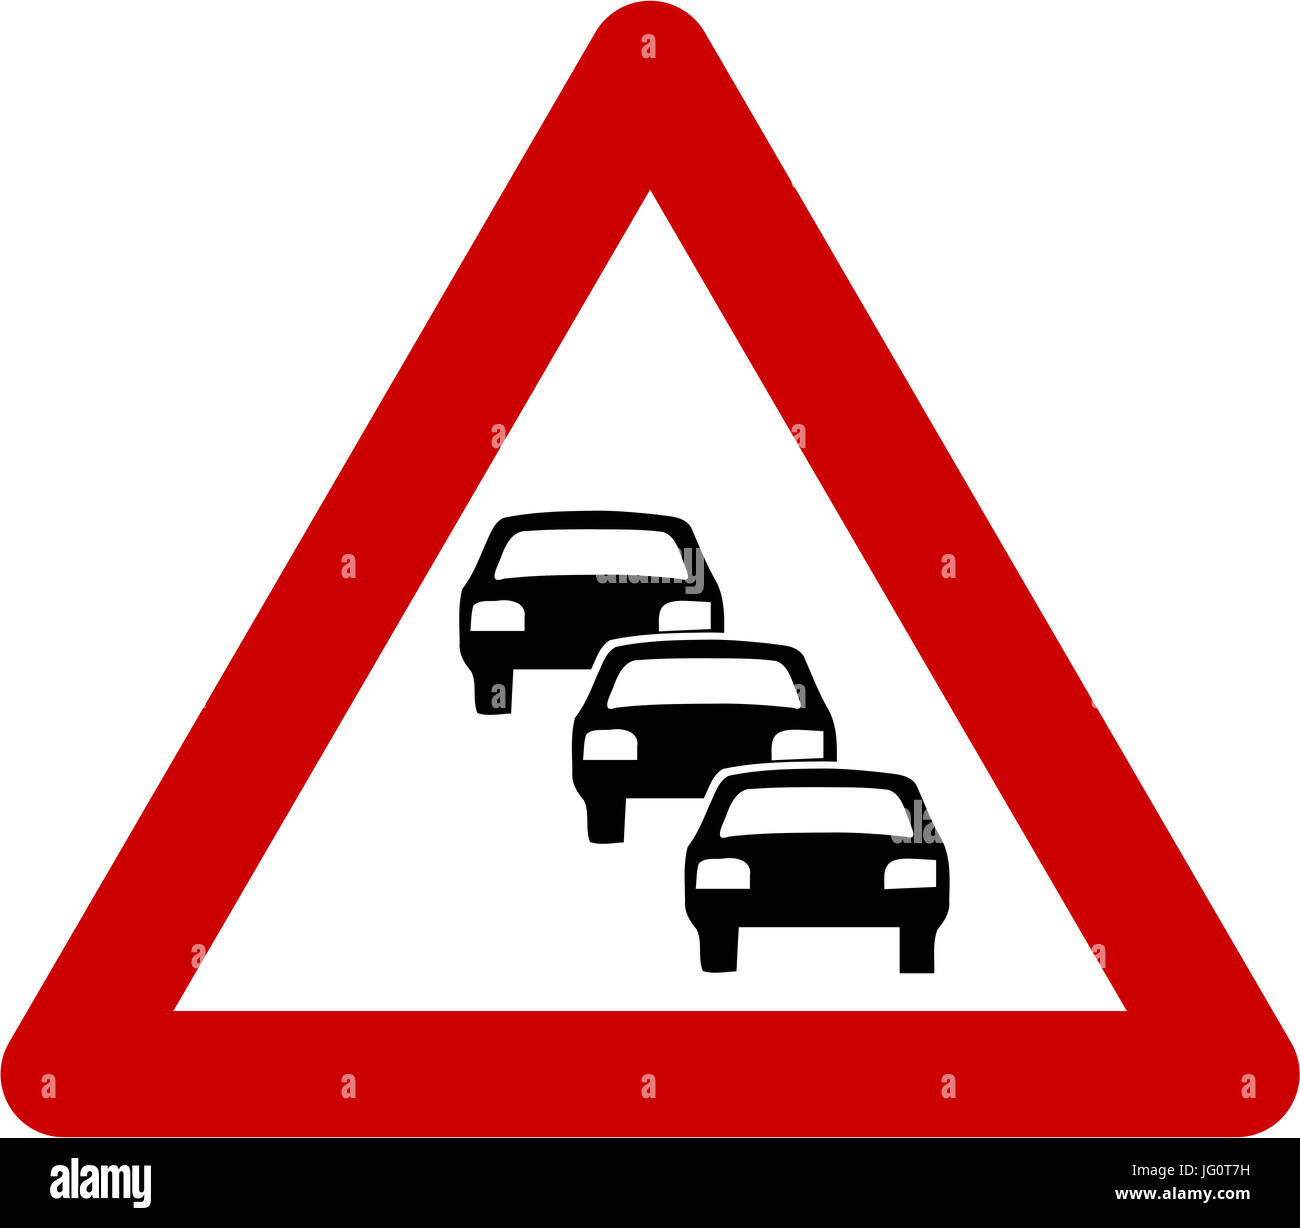 Warning sign with traffic queue symbol Stock Photo